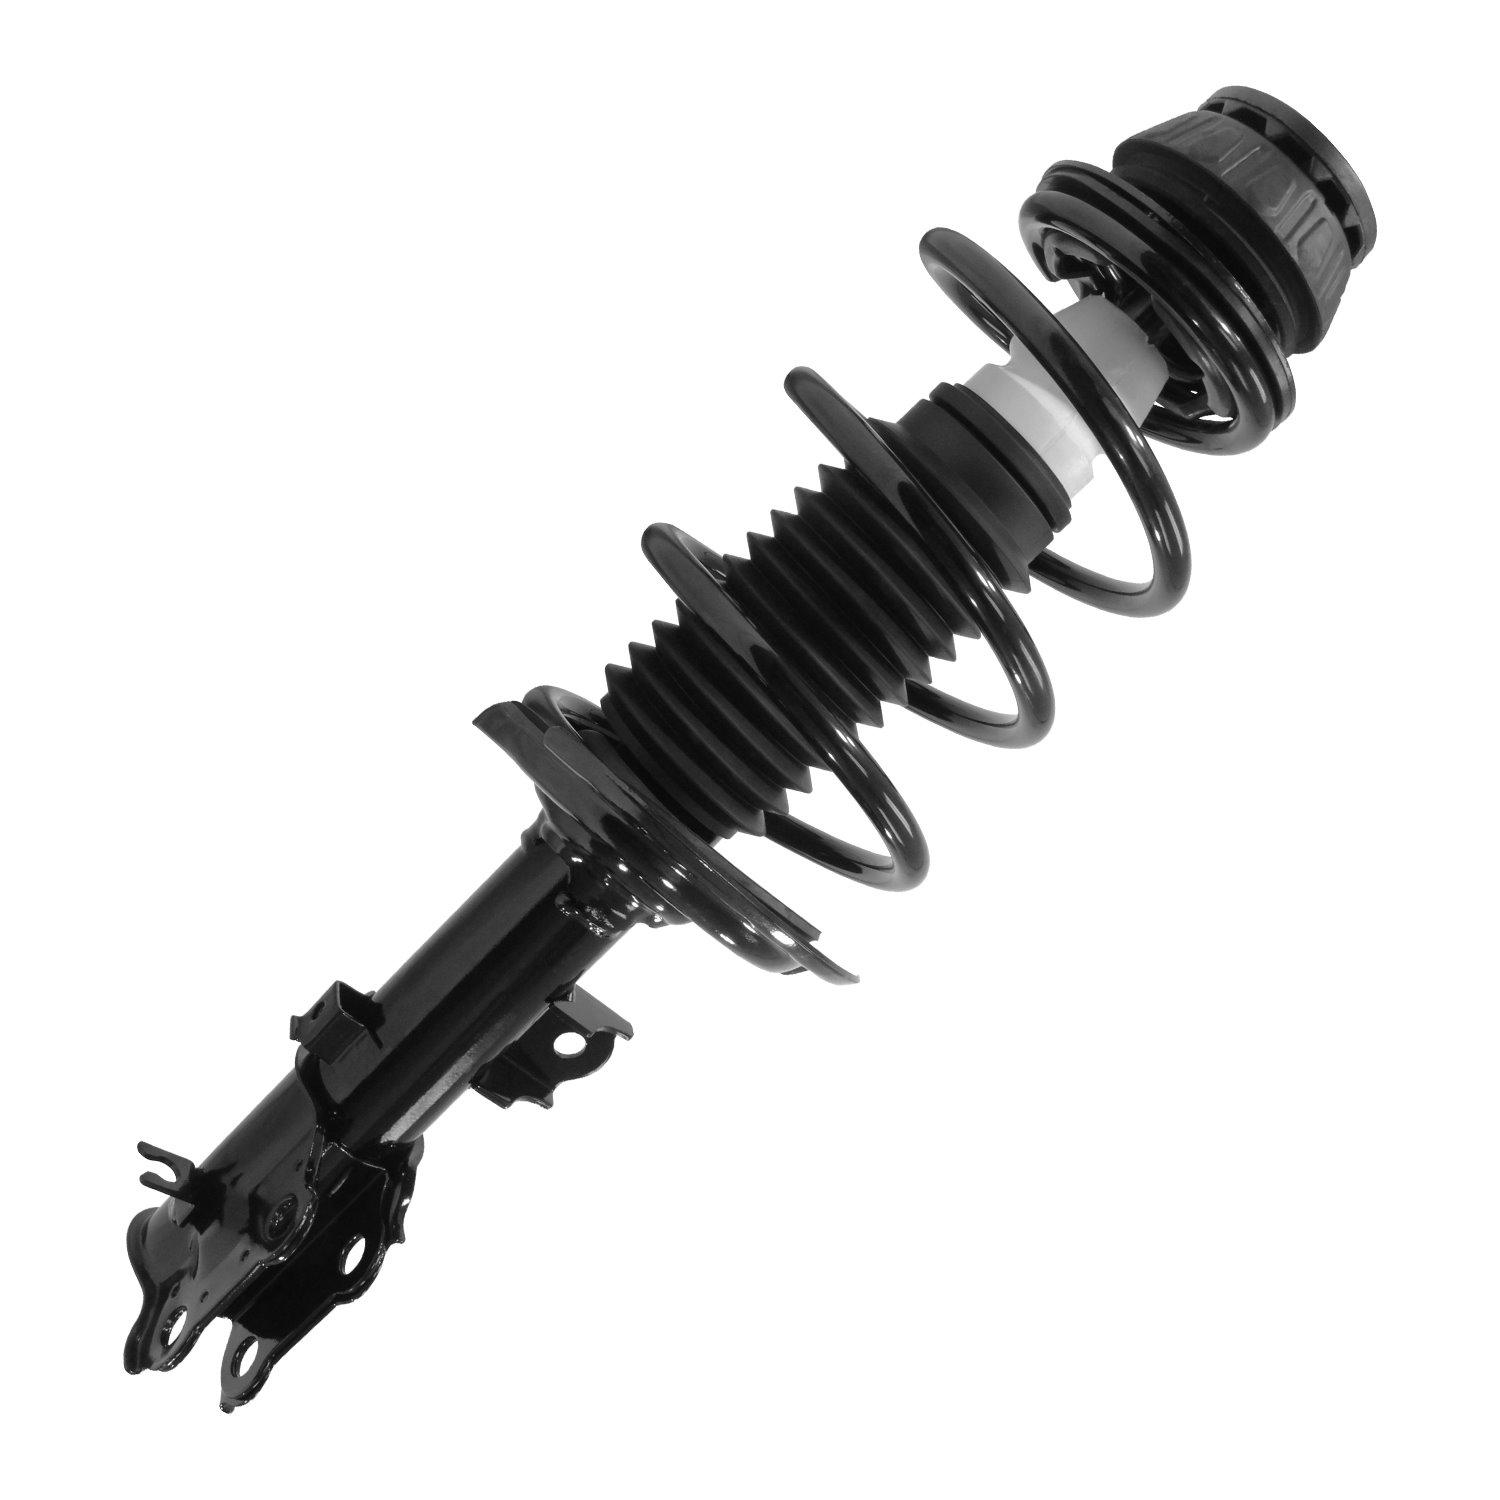 11186 Pre-Assembled Complete Strut Assembly Fits Select Kia Rio, Hyundai Accent